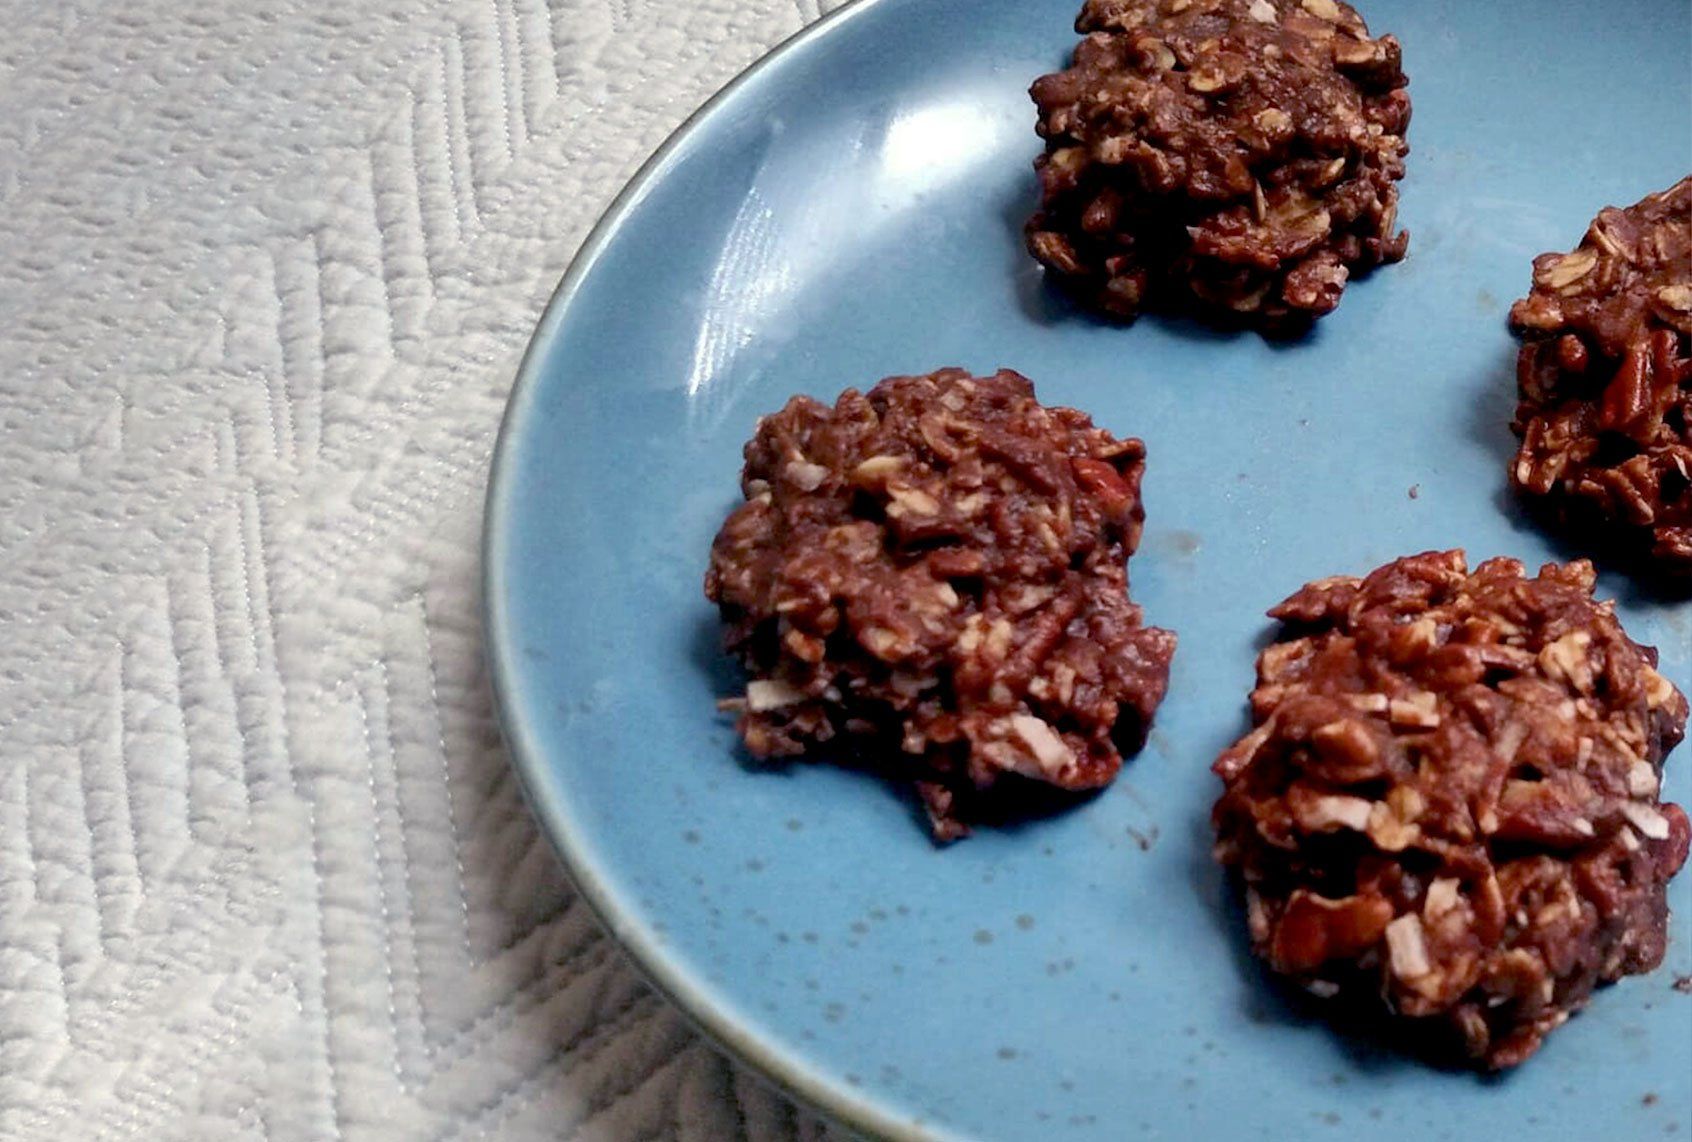 Get your chocolate and coffee fix in these easy no-bake cookies